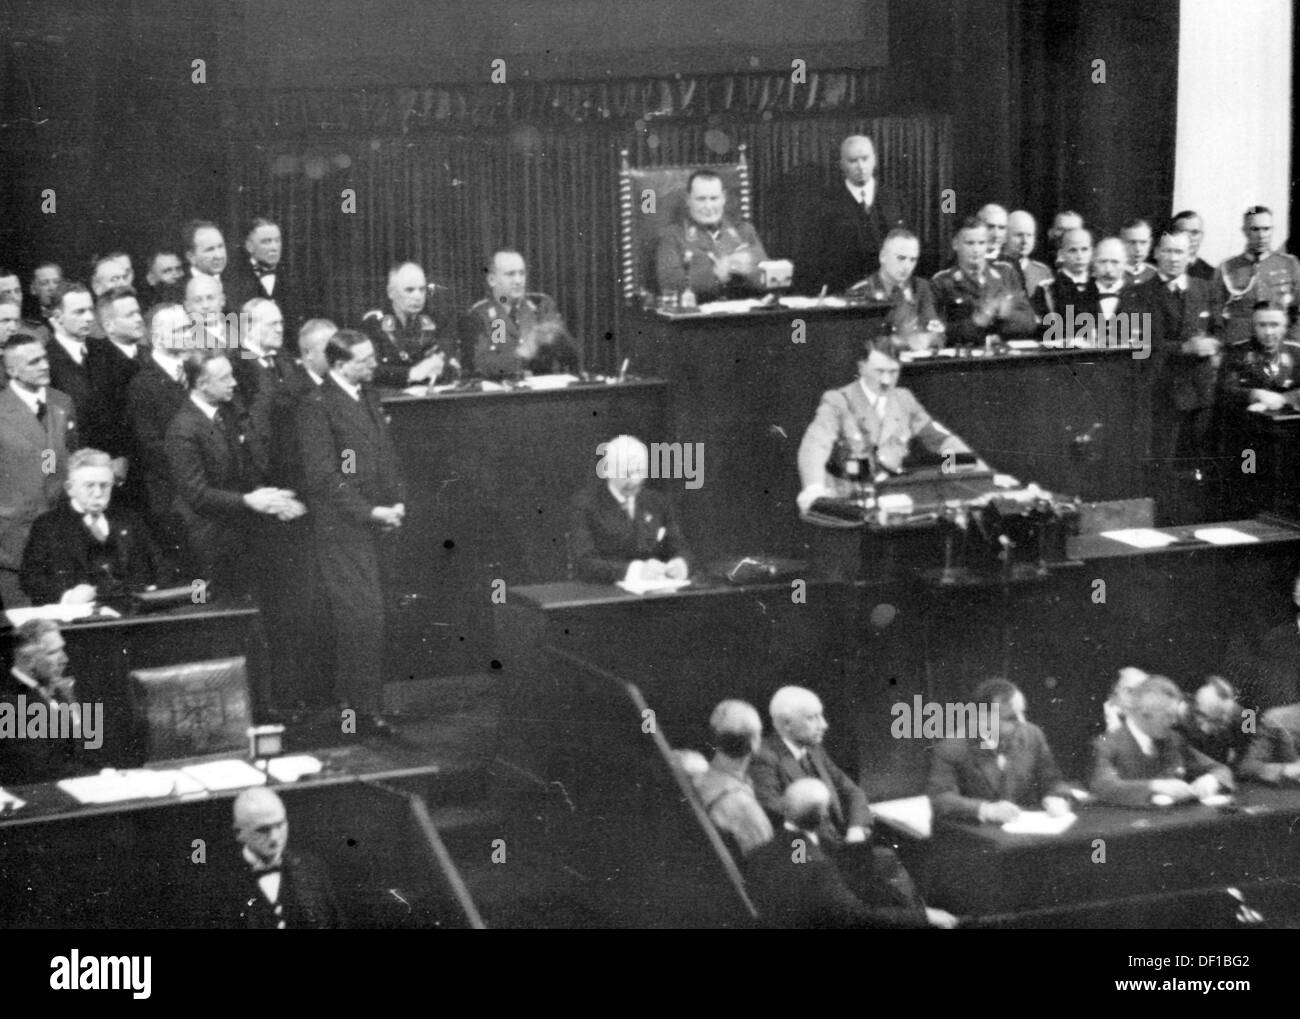 The image from the Nazi Propaganda! shows Reich Chancellor Adolf Hitler delivering a speech to the Reichstag in the Kroll Opera House in Berlin, Germany, 17 May 1933. To the left, first row: Vice Chancellor Franz von Papen; second row Minister of Economics and Agriculture Alfred Hugenberg. Behind Hitler, Hermann Göring. Fotoarchiv für Zeitgeschichte Stock Photo